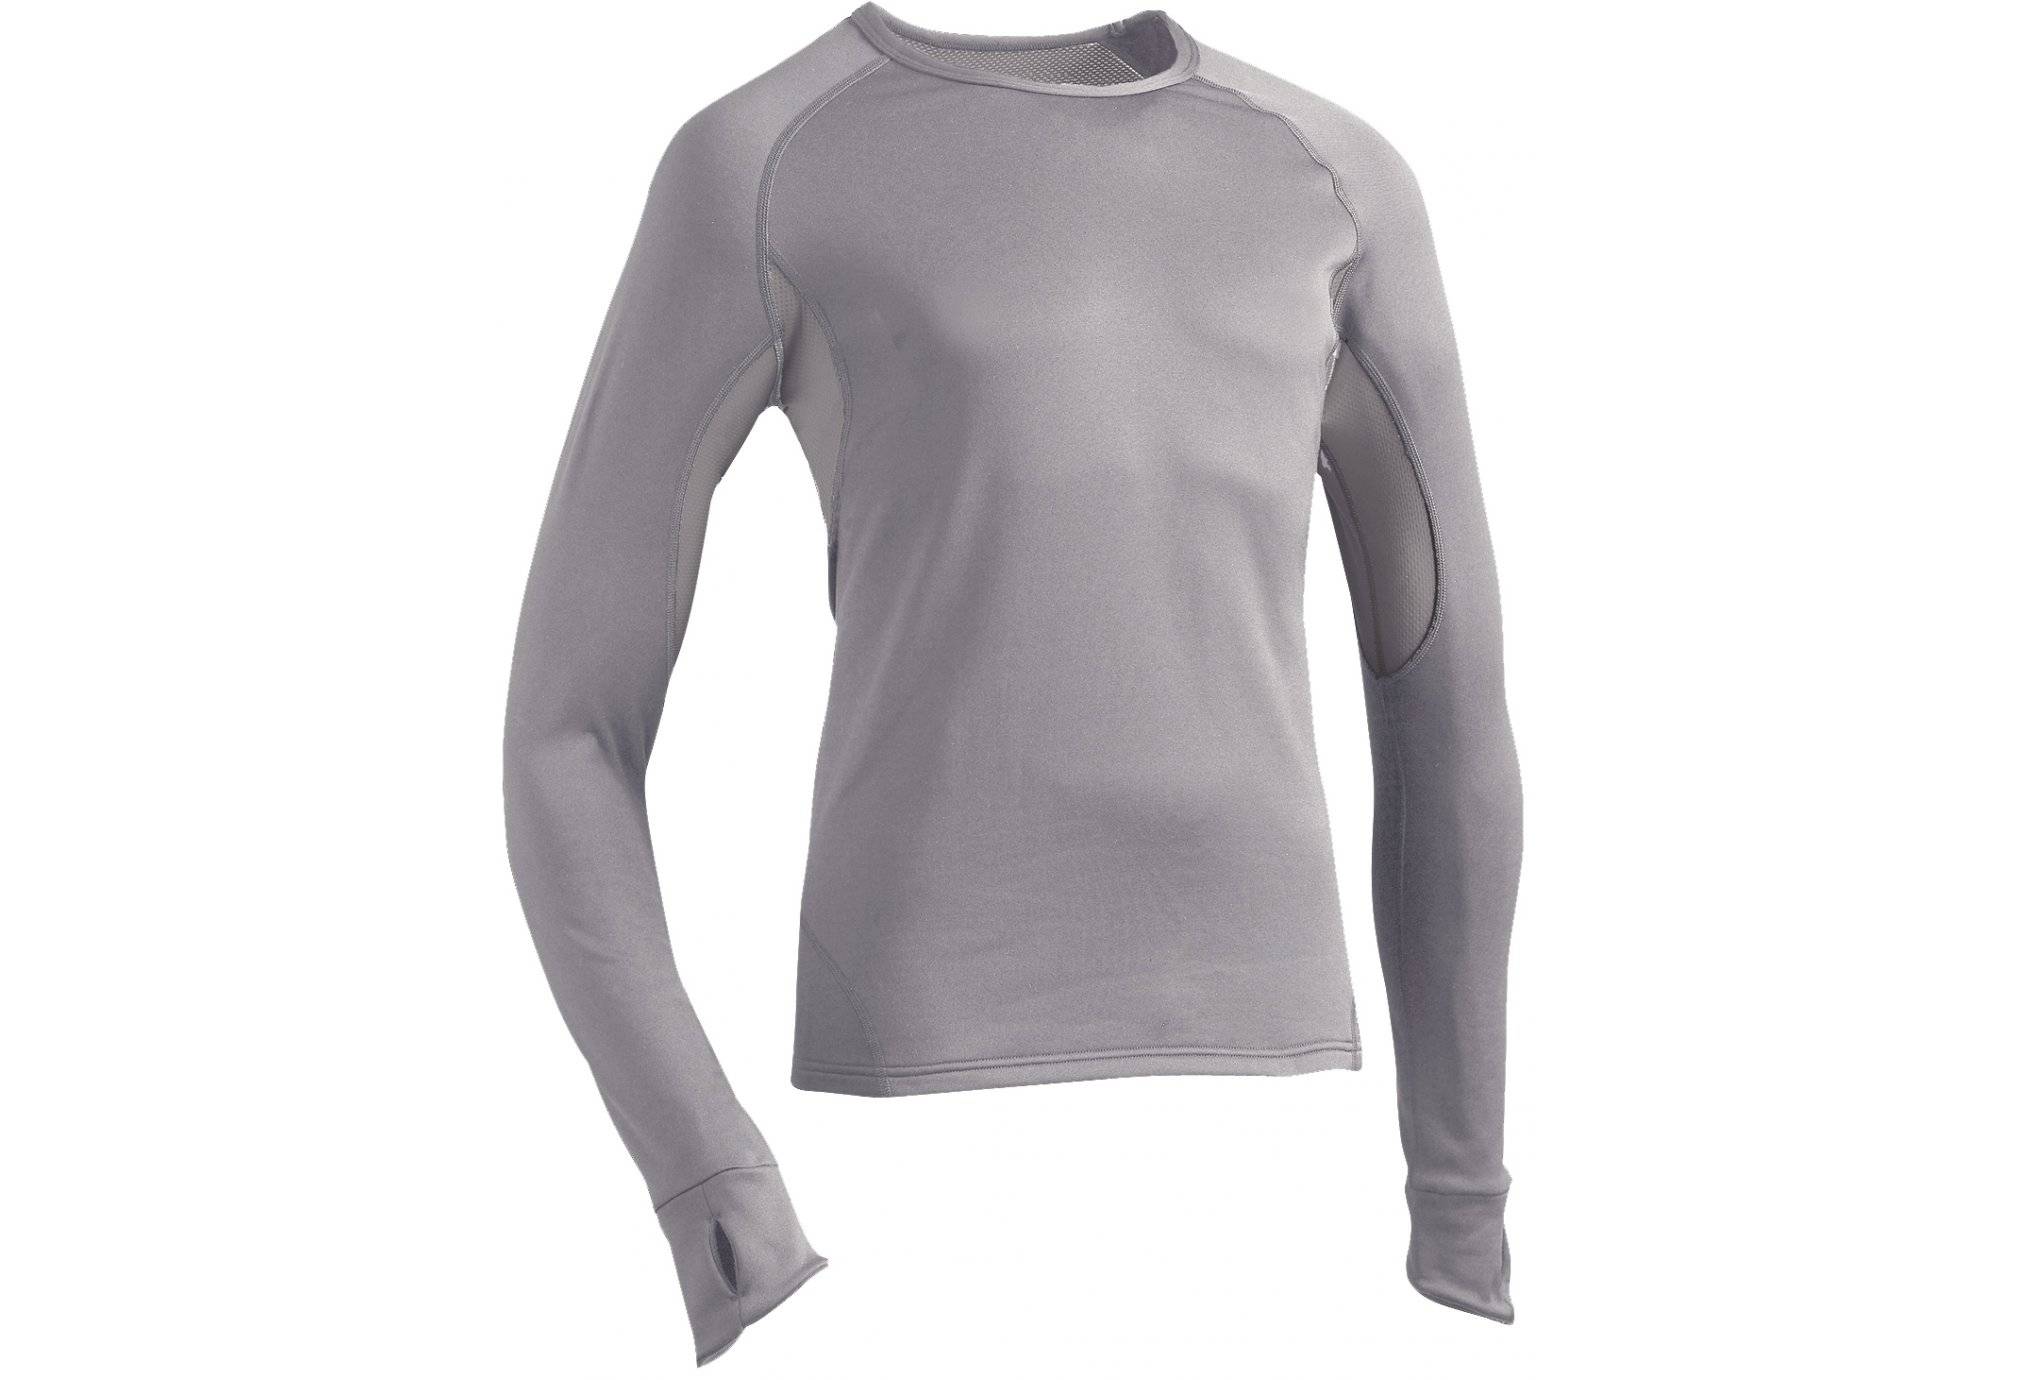 Damart Sport Tee-Shirt Activ Body 4 Thermolactyl M homme pas cher